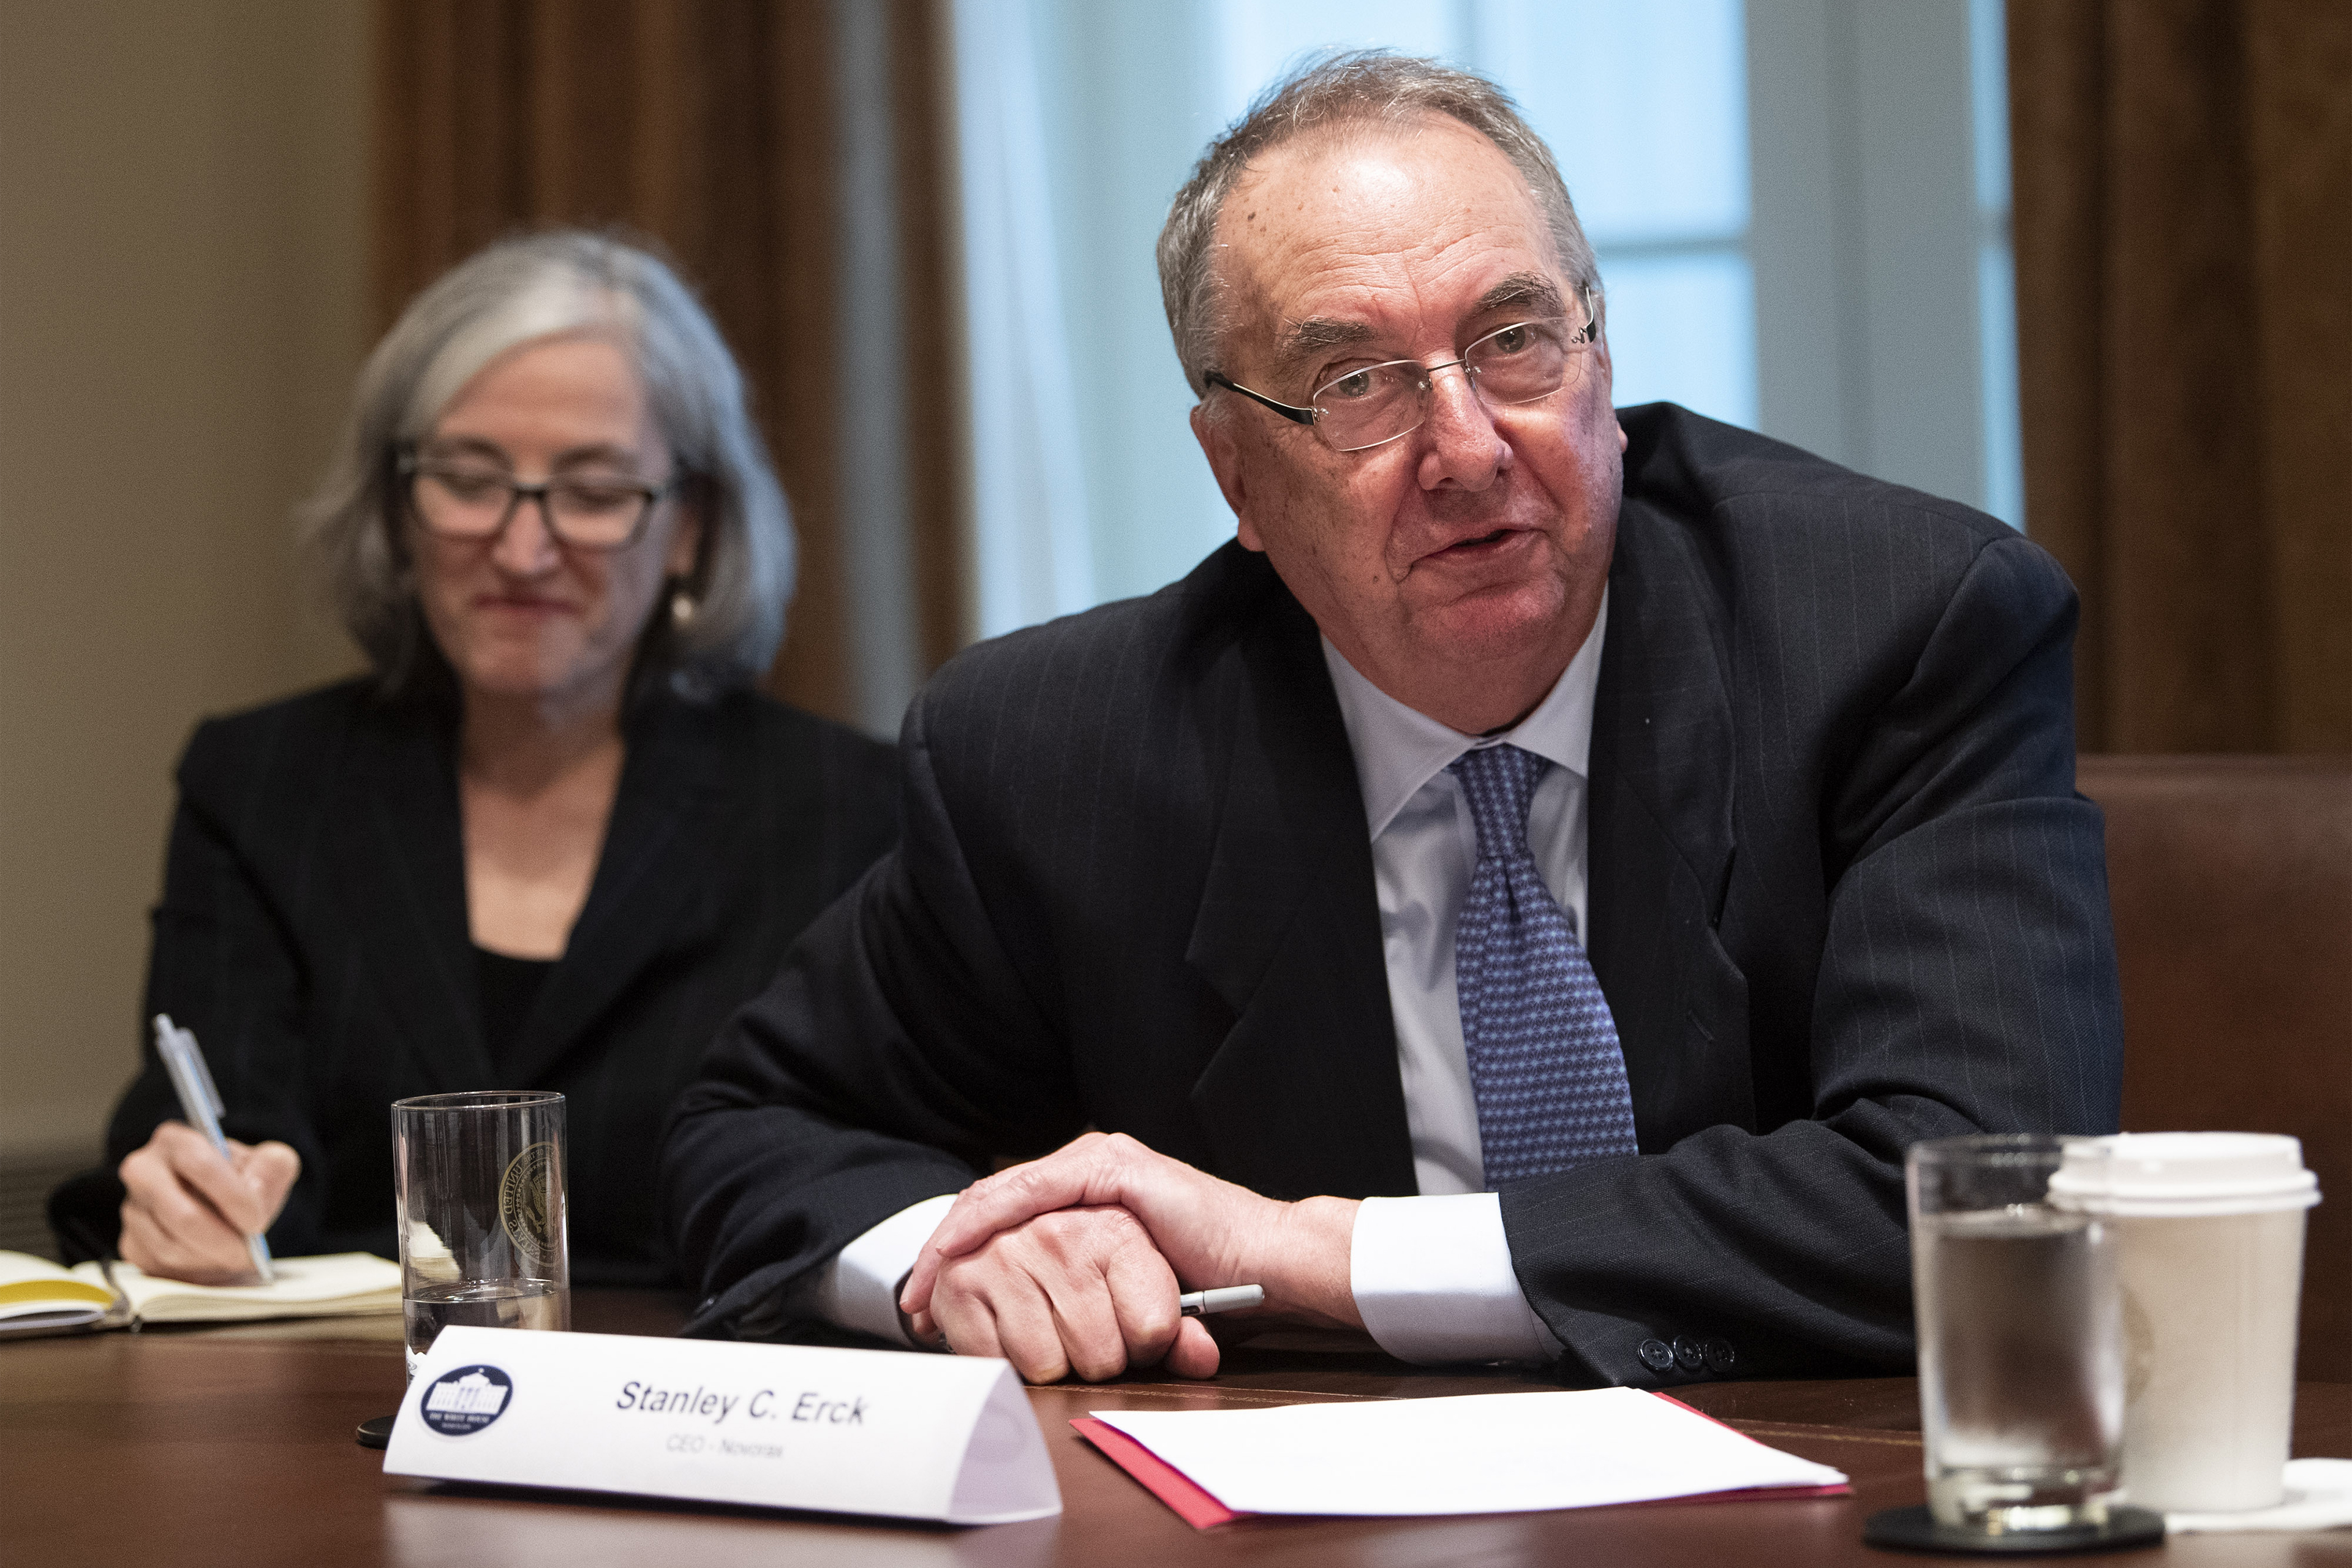 Stanley Erck is seen speaking at a table, with a woman blurred in the background behind him. A nameplate in front of him reads, "Stanley C. Erck. CEO, Novavax."  